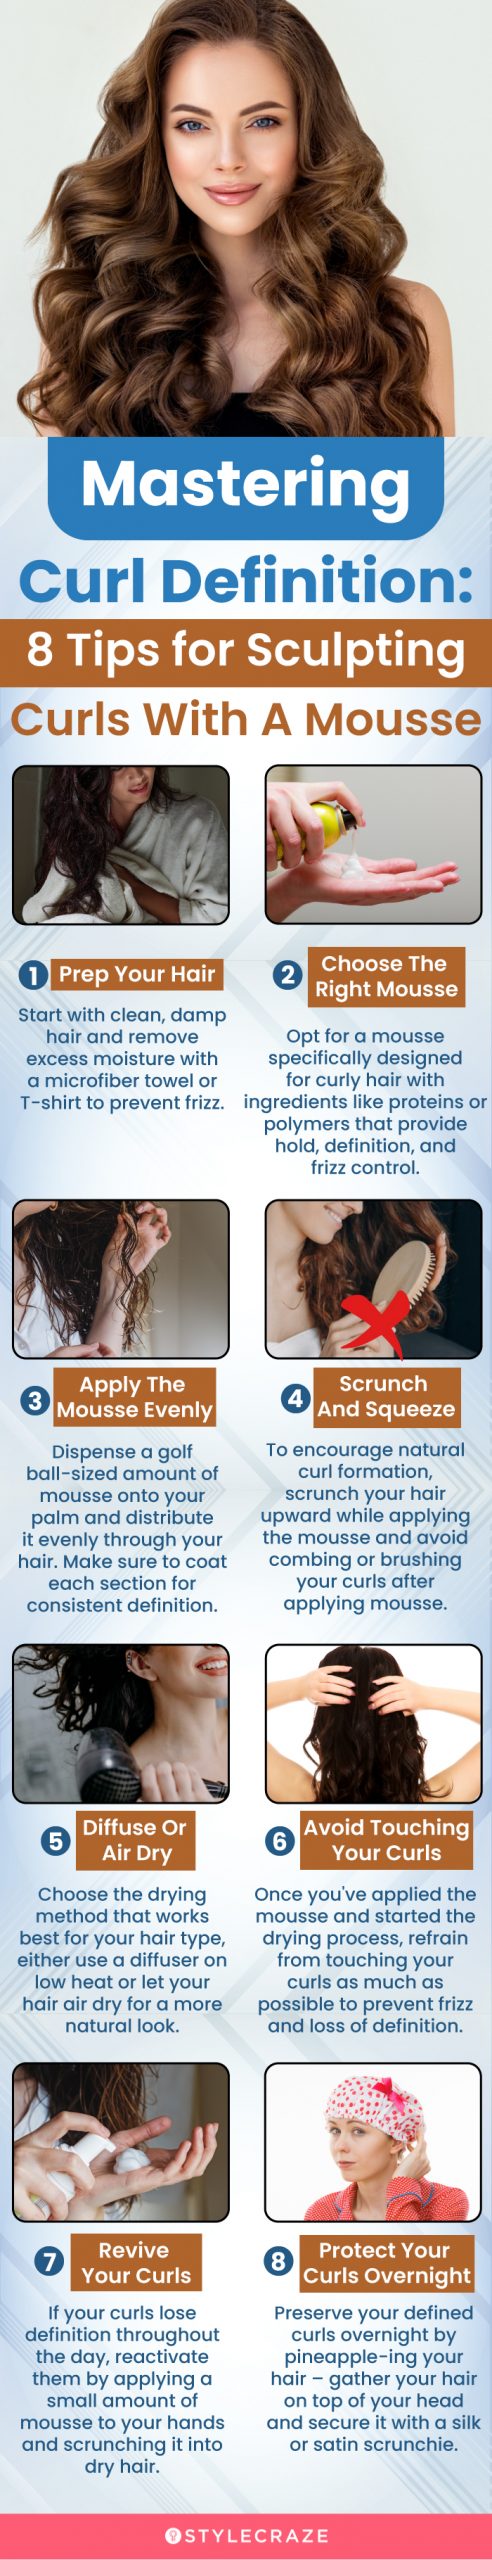 8 Tips for Sculpting Curls With A Mousse (infographic)